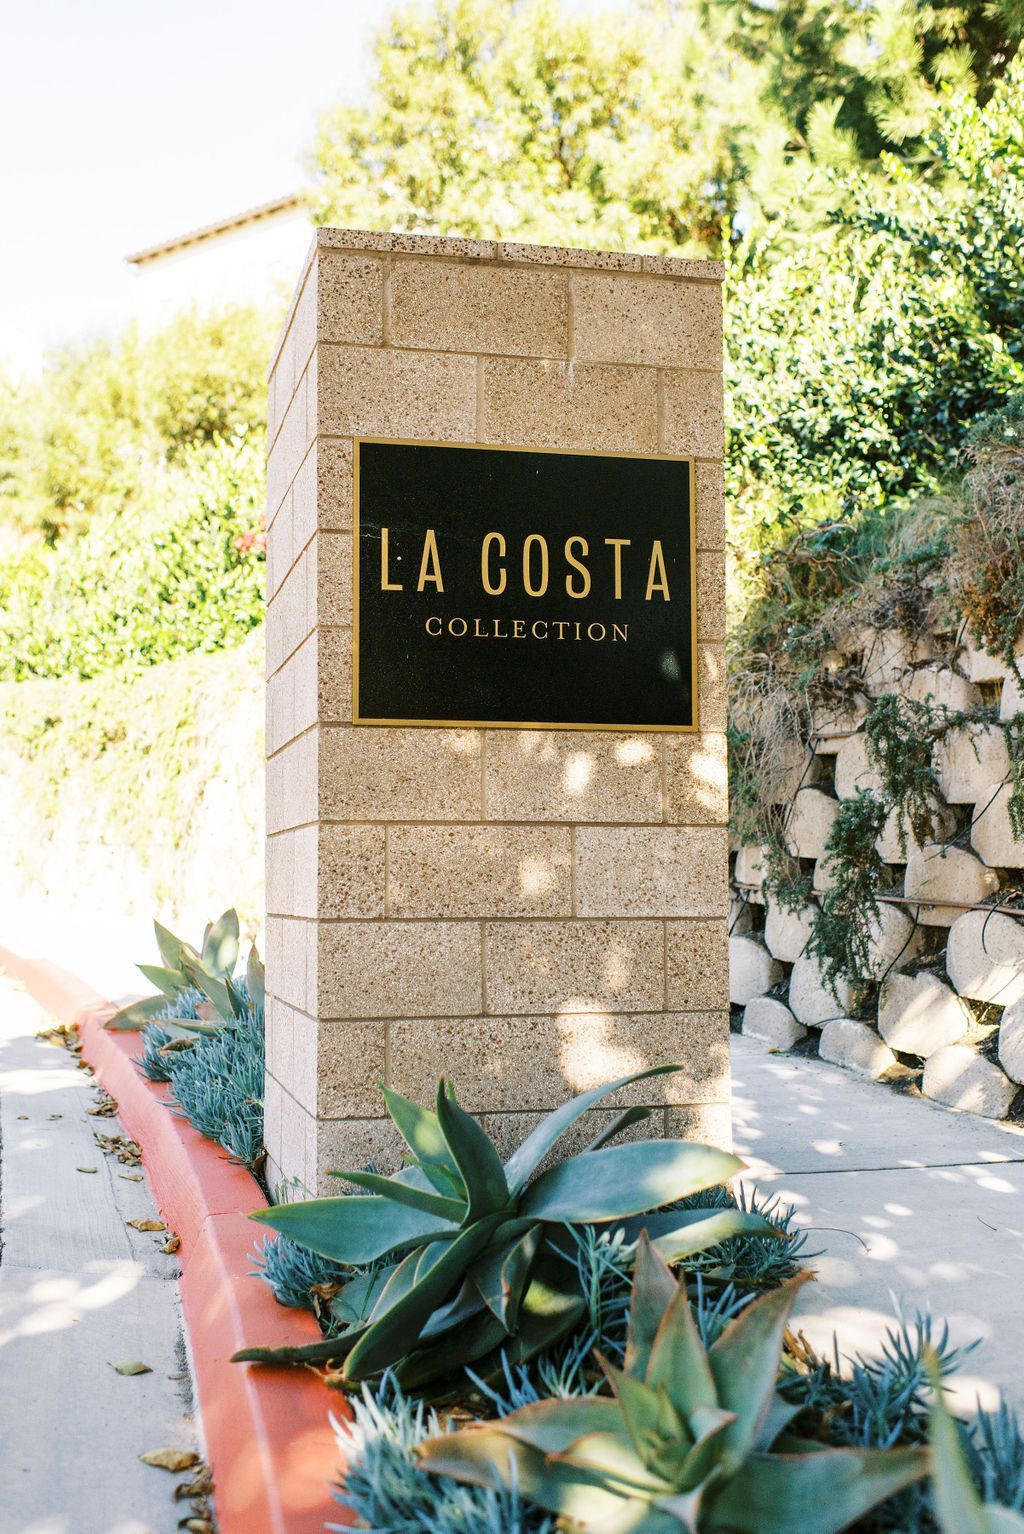 a sign that says ' l' acosta collection ' on it